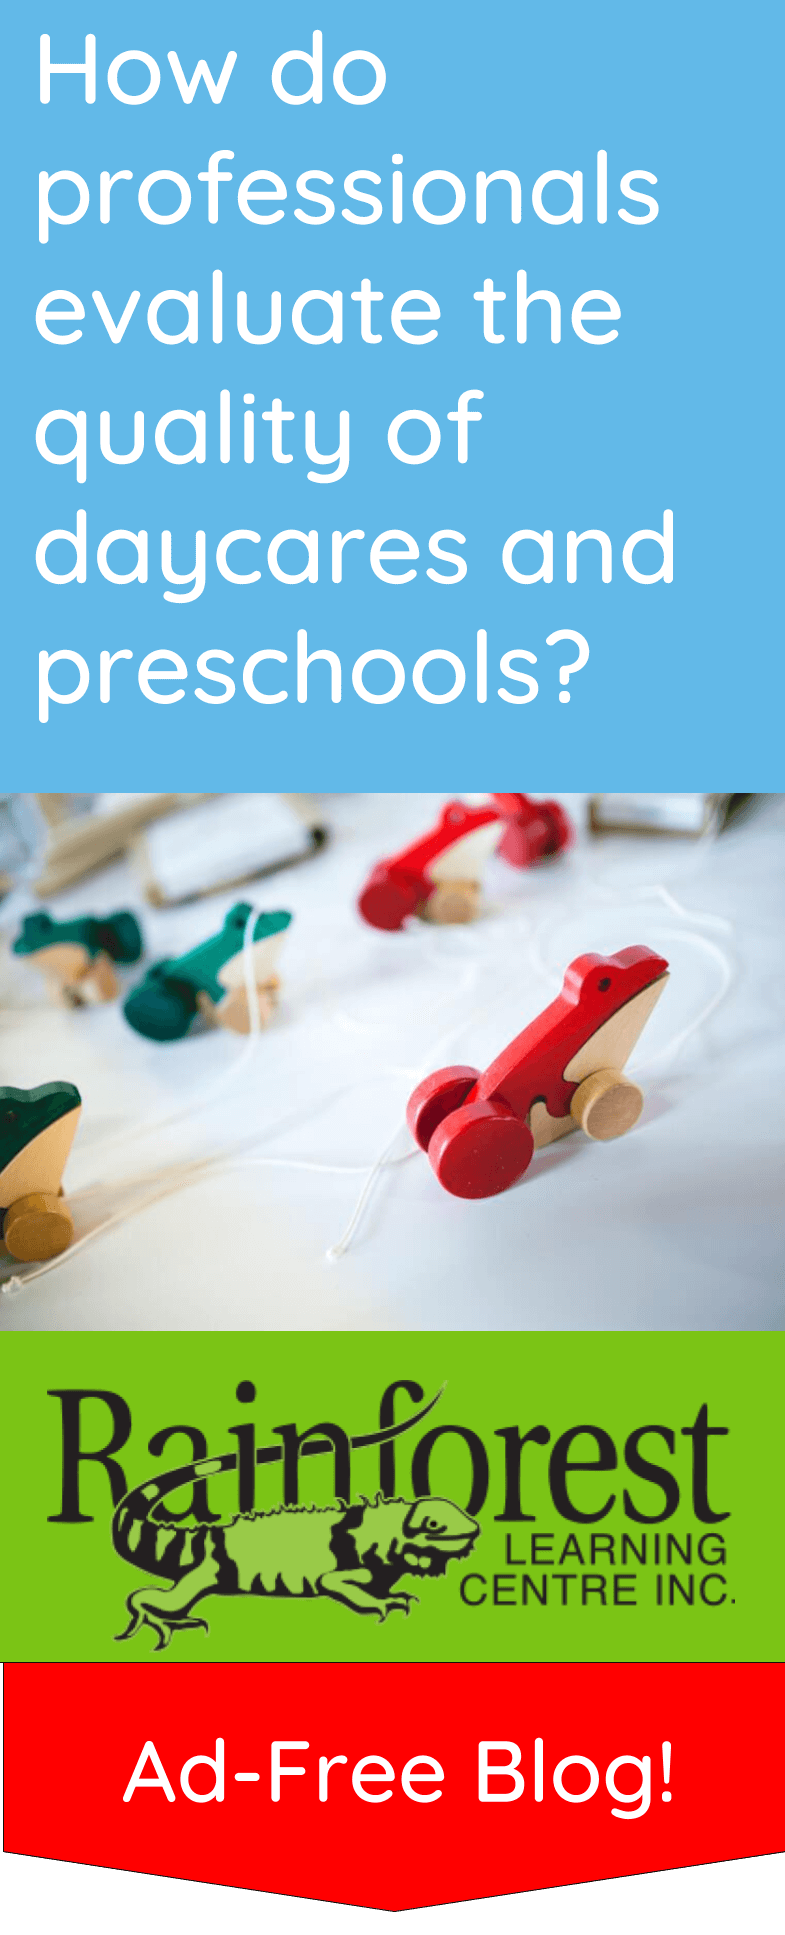 How do professionals evaluate the quality of daycares and preschools? - pinterest image